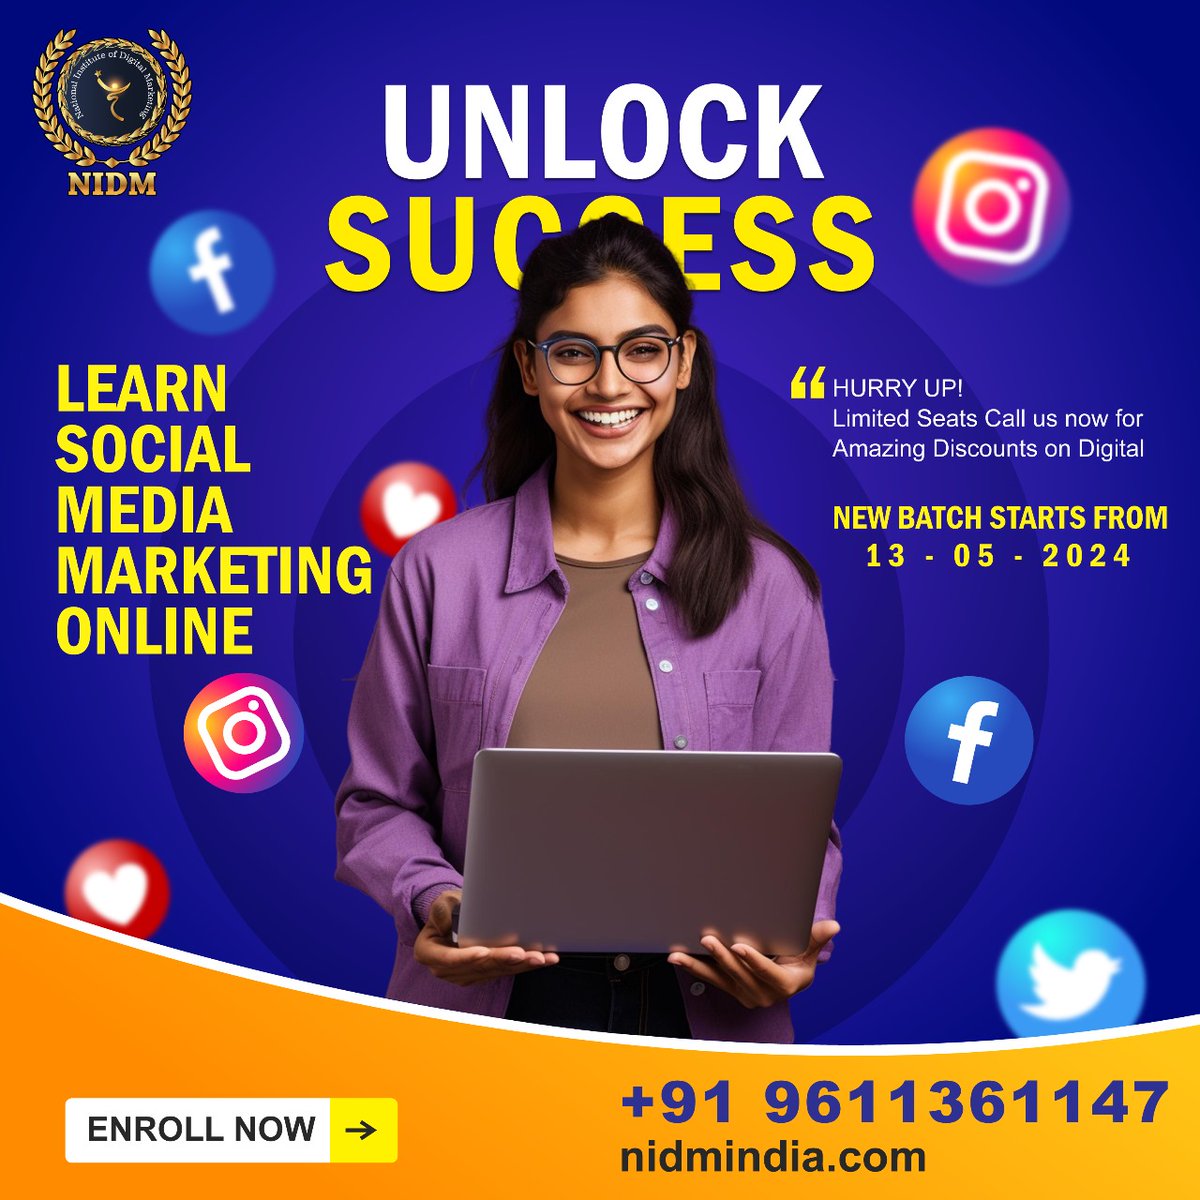 New Batch Started Today!
Would like to Join Next Batch?
Feel Free to Contact +91 96113 611147

#DigitalMarketing #NIDM #JrNTR #AndhraPradeshElection2024 #Elections2024 #ThalapathyVijay #Kashmir #SEO #Education #SEOcourse #OnlineJobs